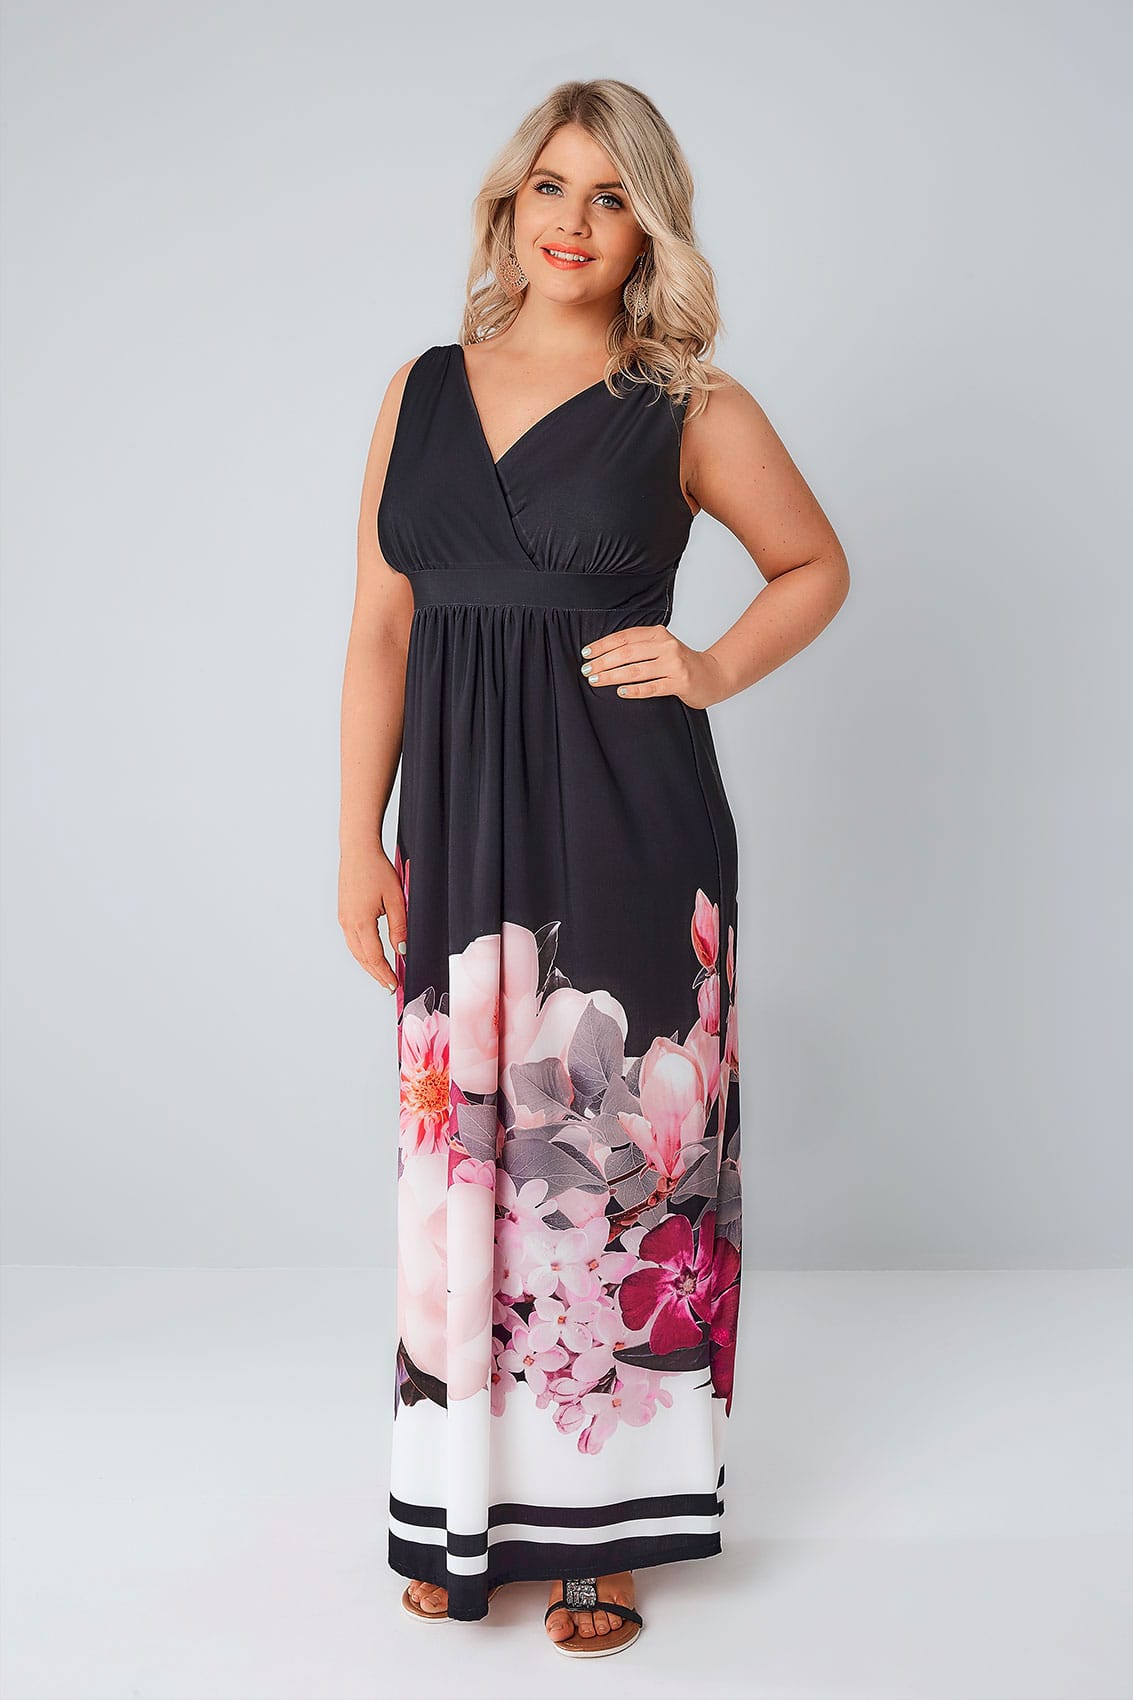 Size plus size pink maxi dress bible, Ellesse ringer t shirt with retro back graphic, groupon fruit of the loom t shirts. 